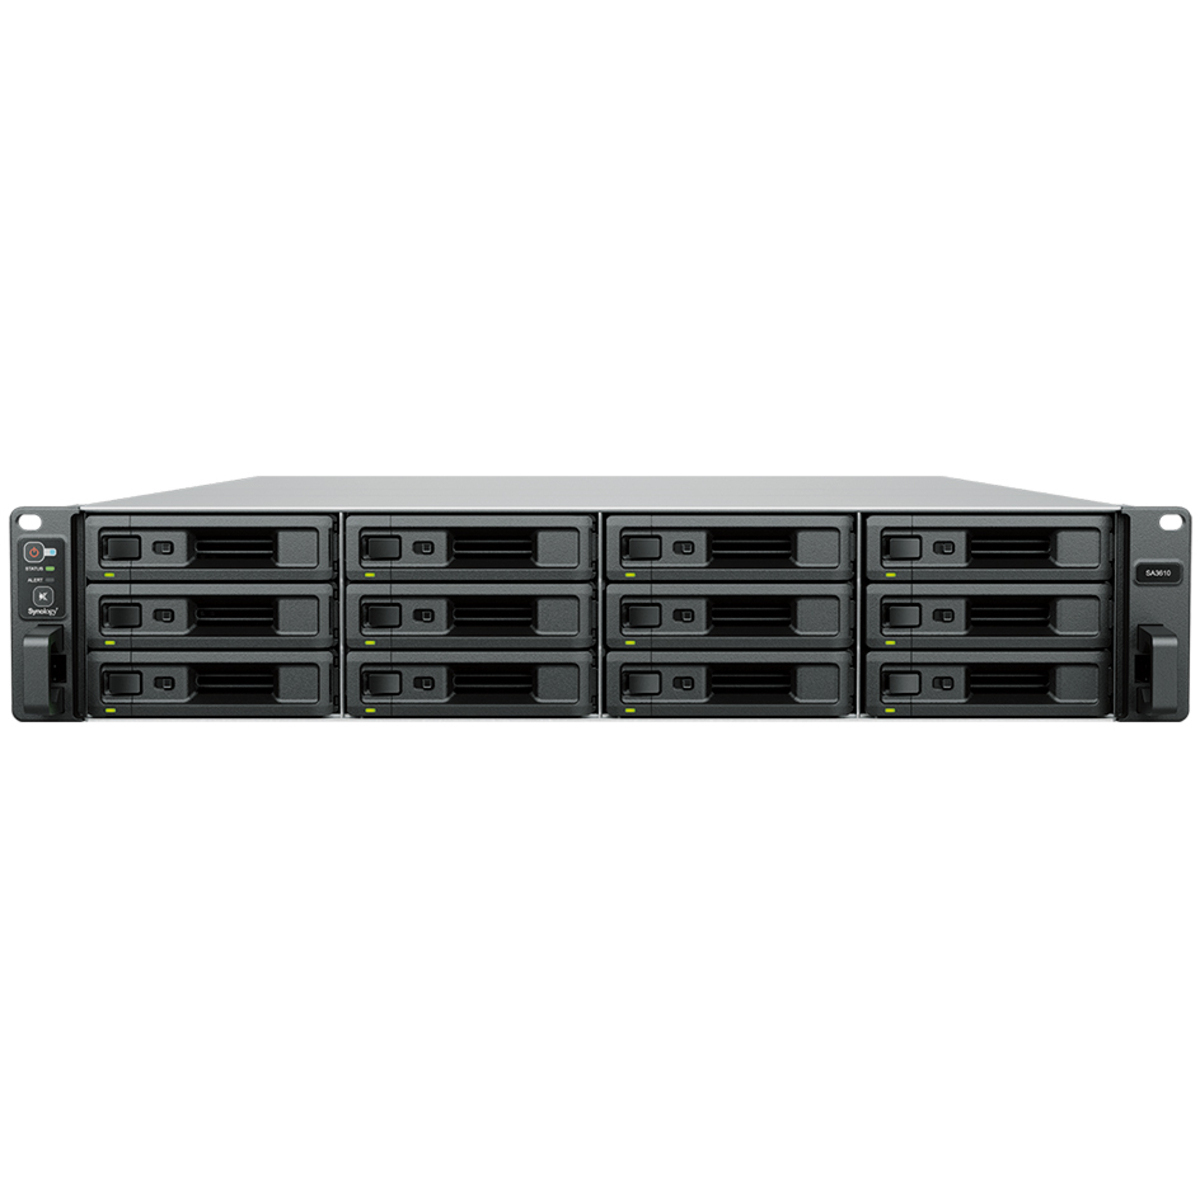 Synology RackStation SA3610 88tb 12-Bay RackMount Large Business / Enterprise NAS - Network Attached Storage Device 11x8tb Seagate EXOS 7E10 ST8000NM017B 3.5 7200rpm SATA 6Gb/s HDD ENTERPRISE Class Drives Installed - Burn-In Tested RackStation SA3610